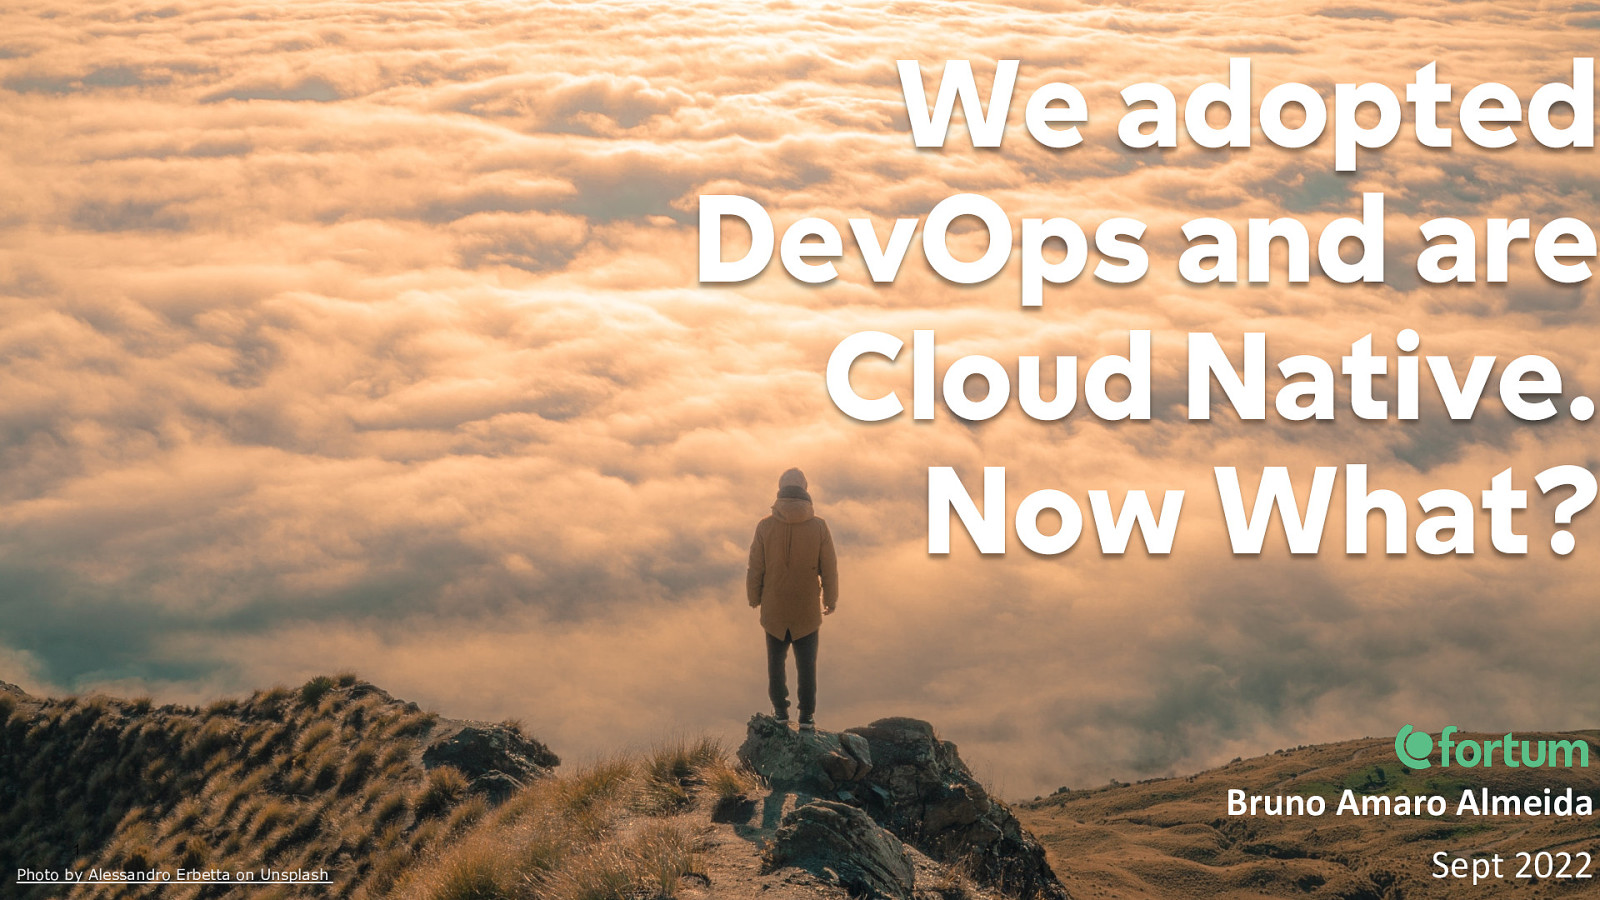 We adopted DevOps and are Cloud-native. Now What?